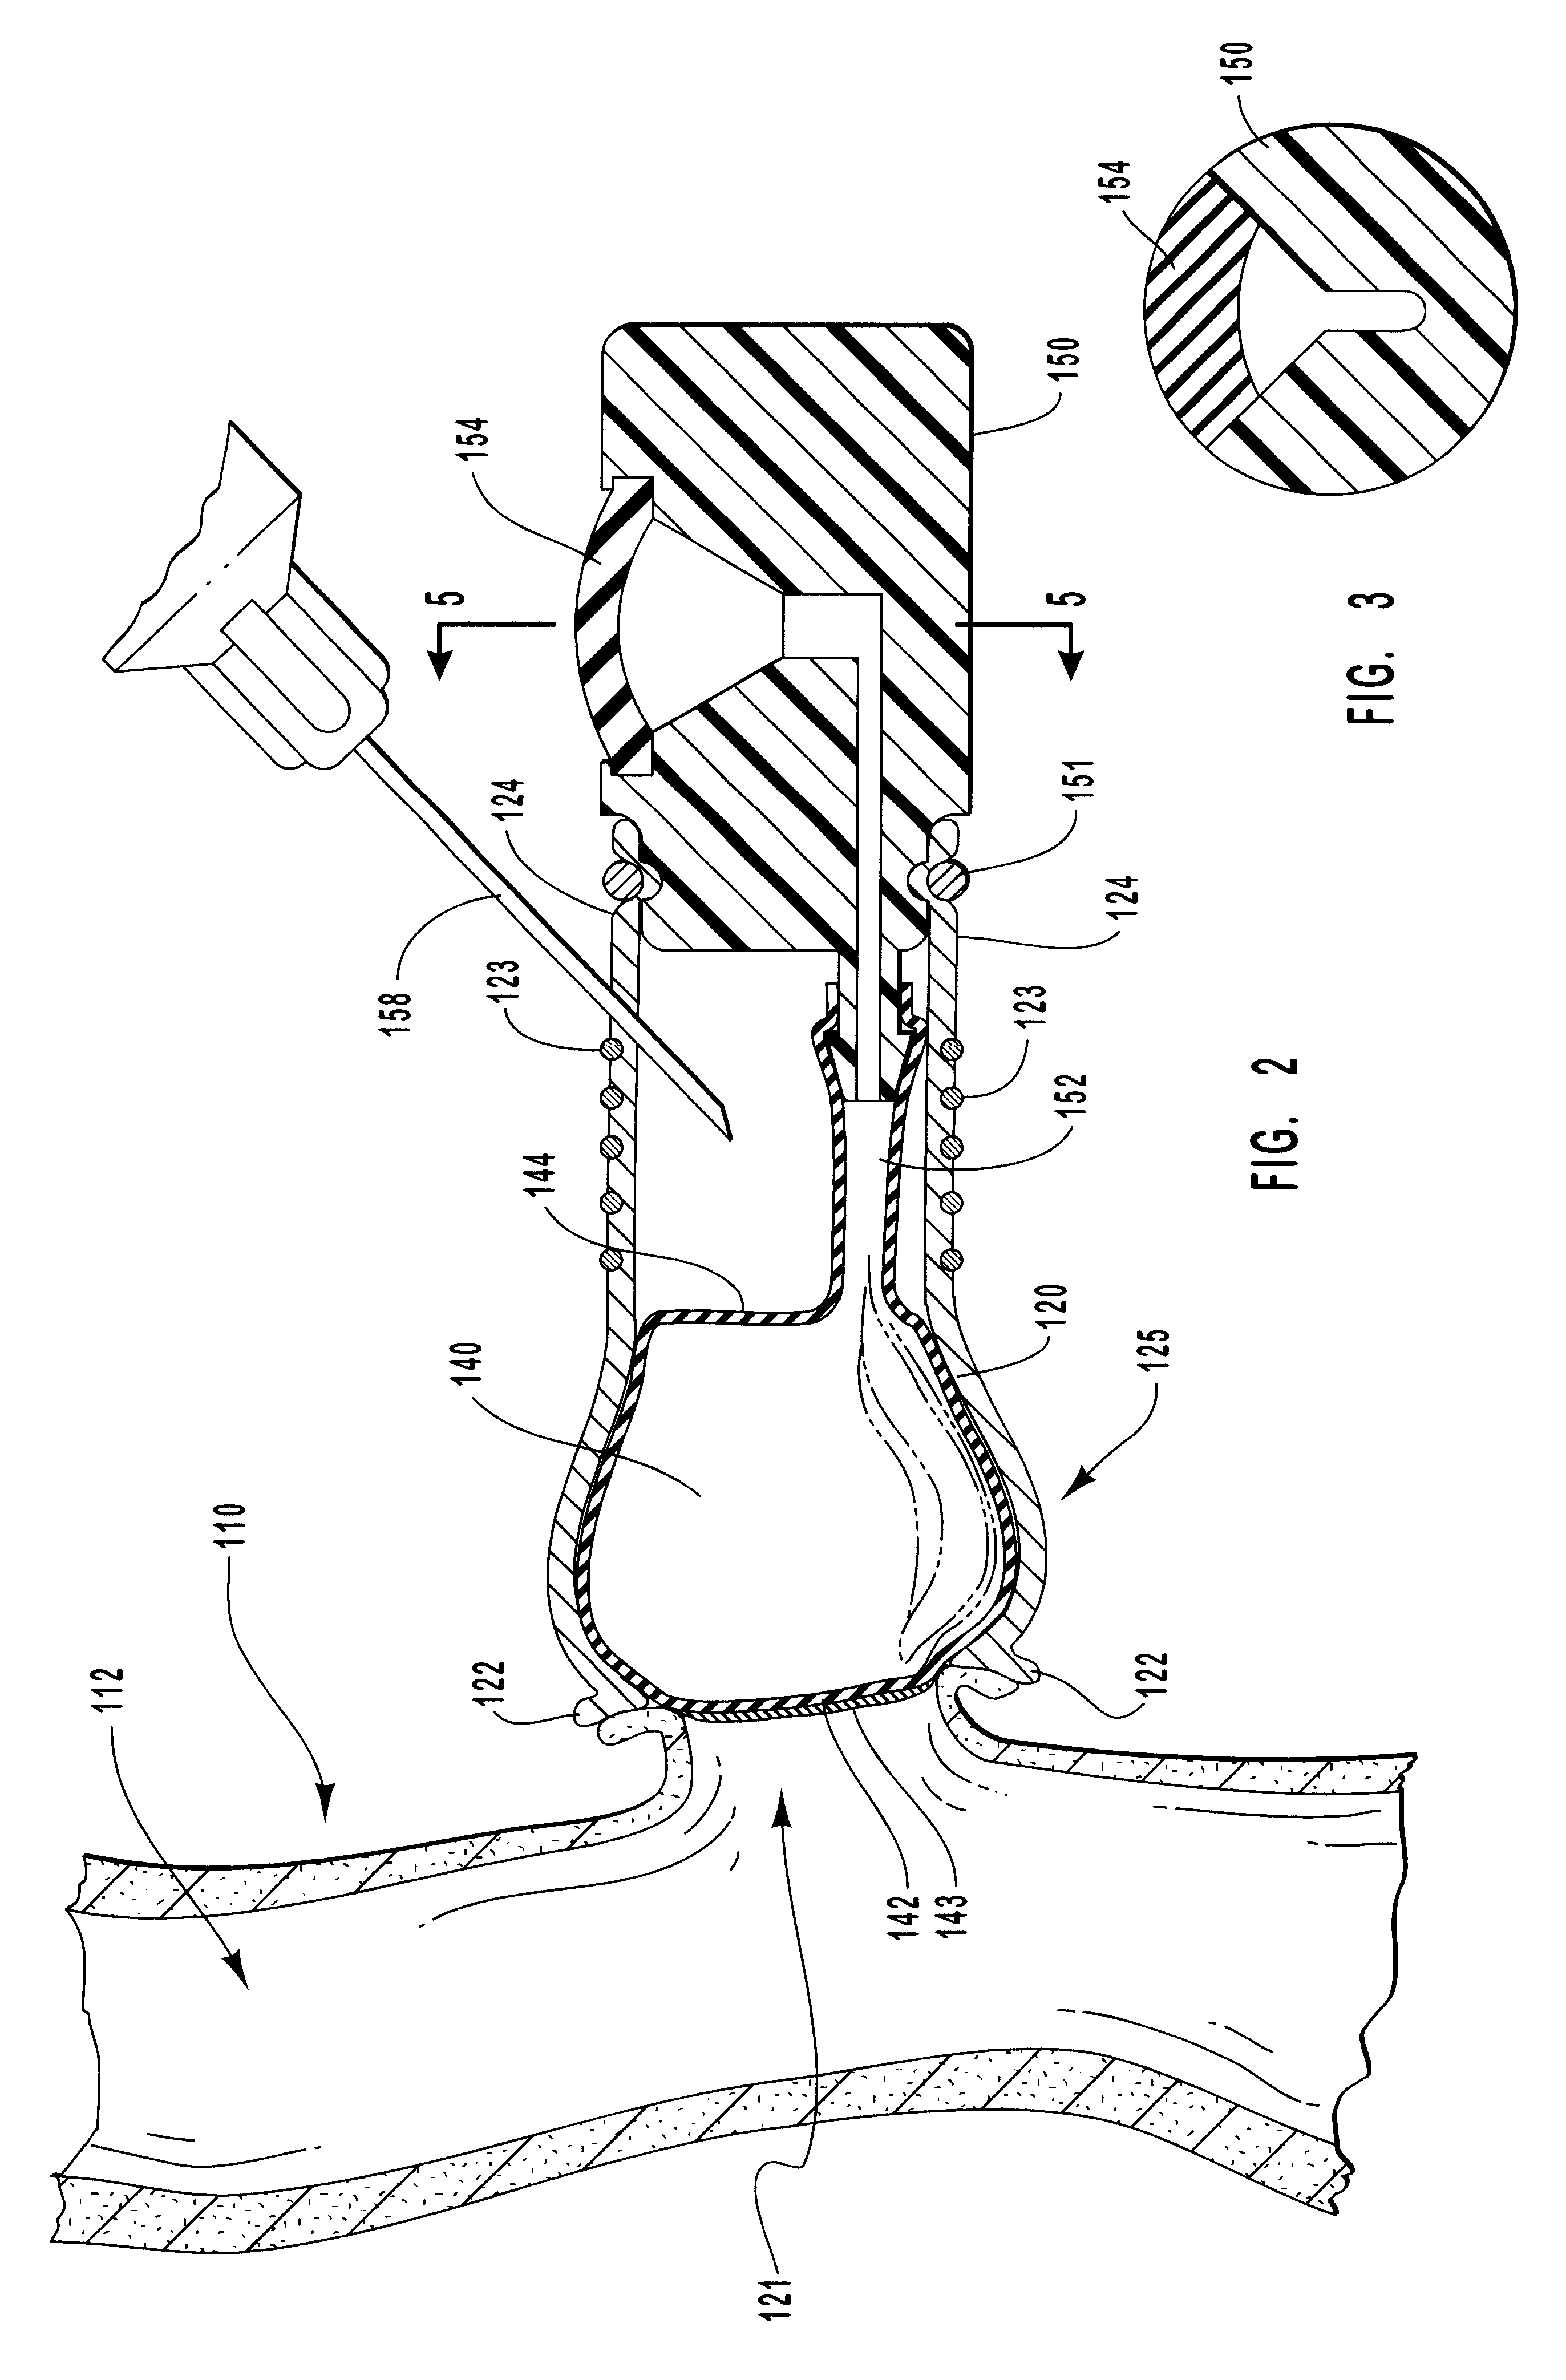 Vascular access devices and systems